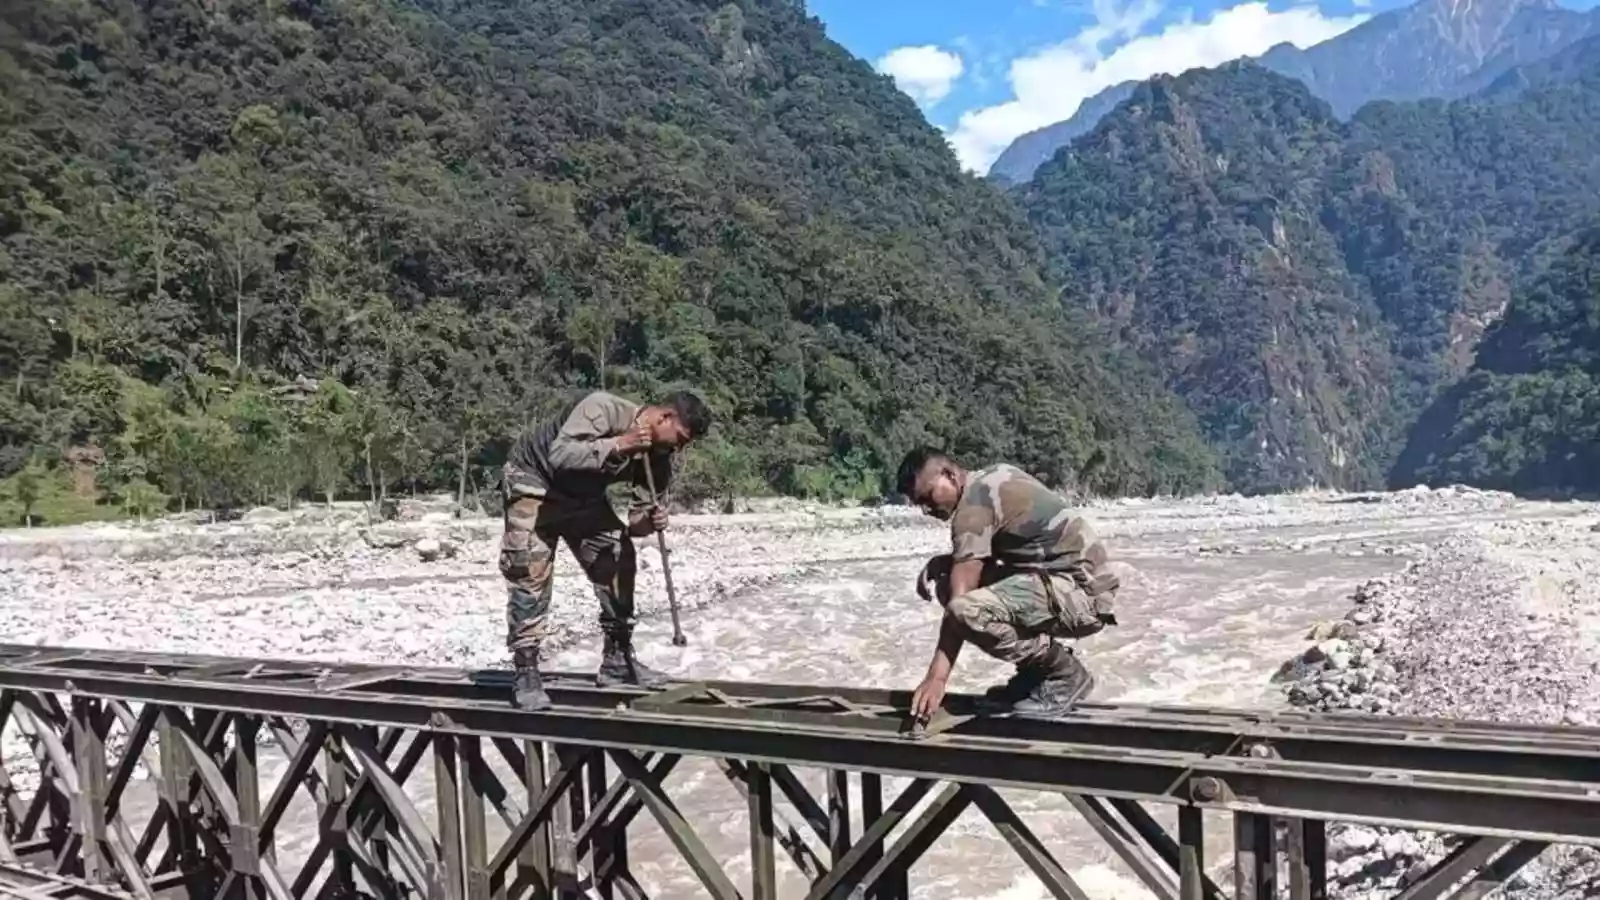  Indian army constructs rapid footbridge over flooded Teesta river